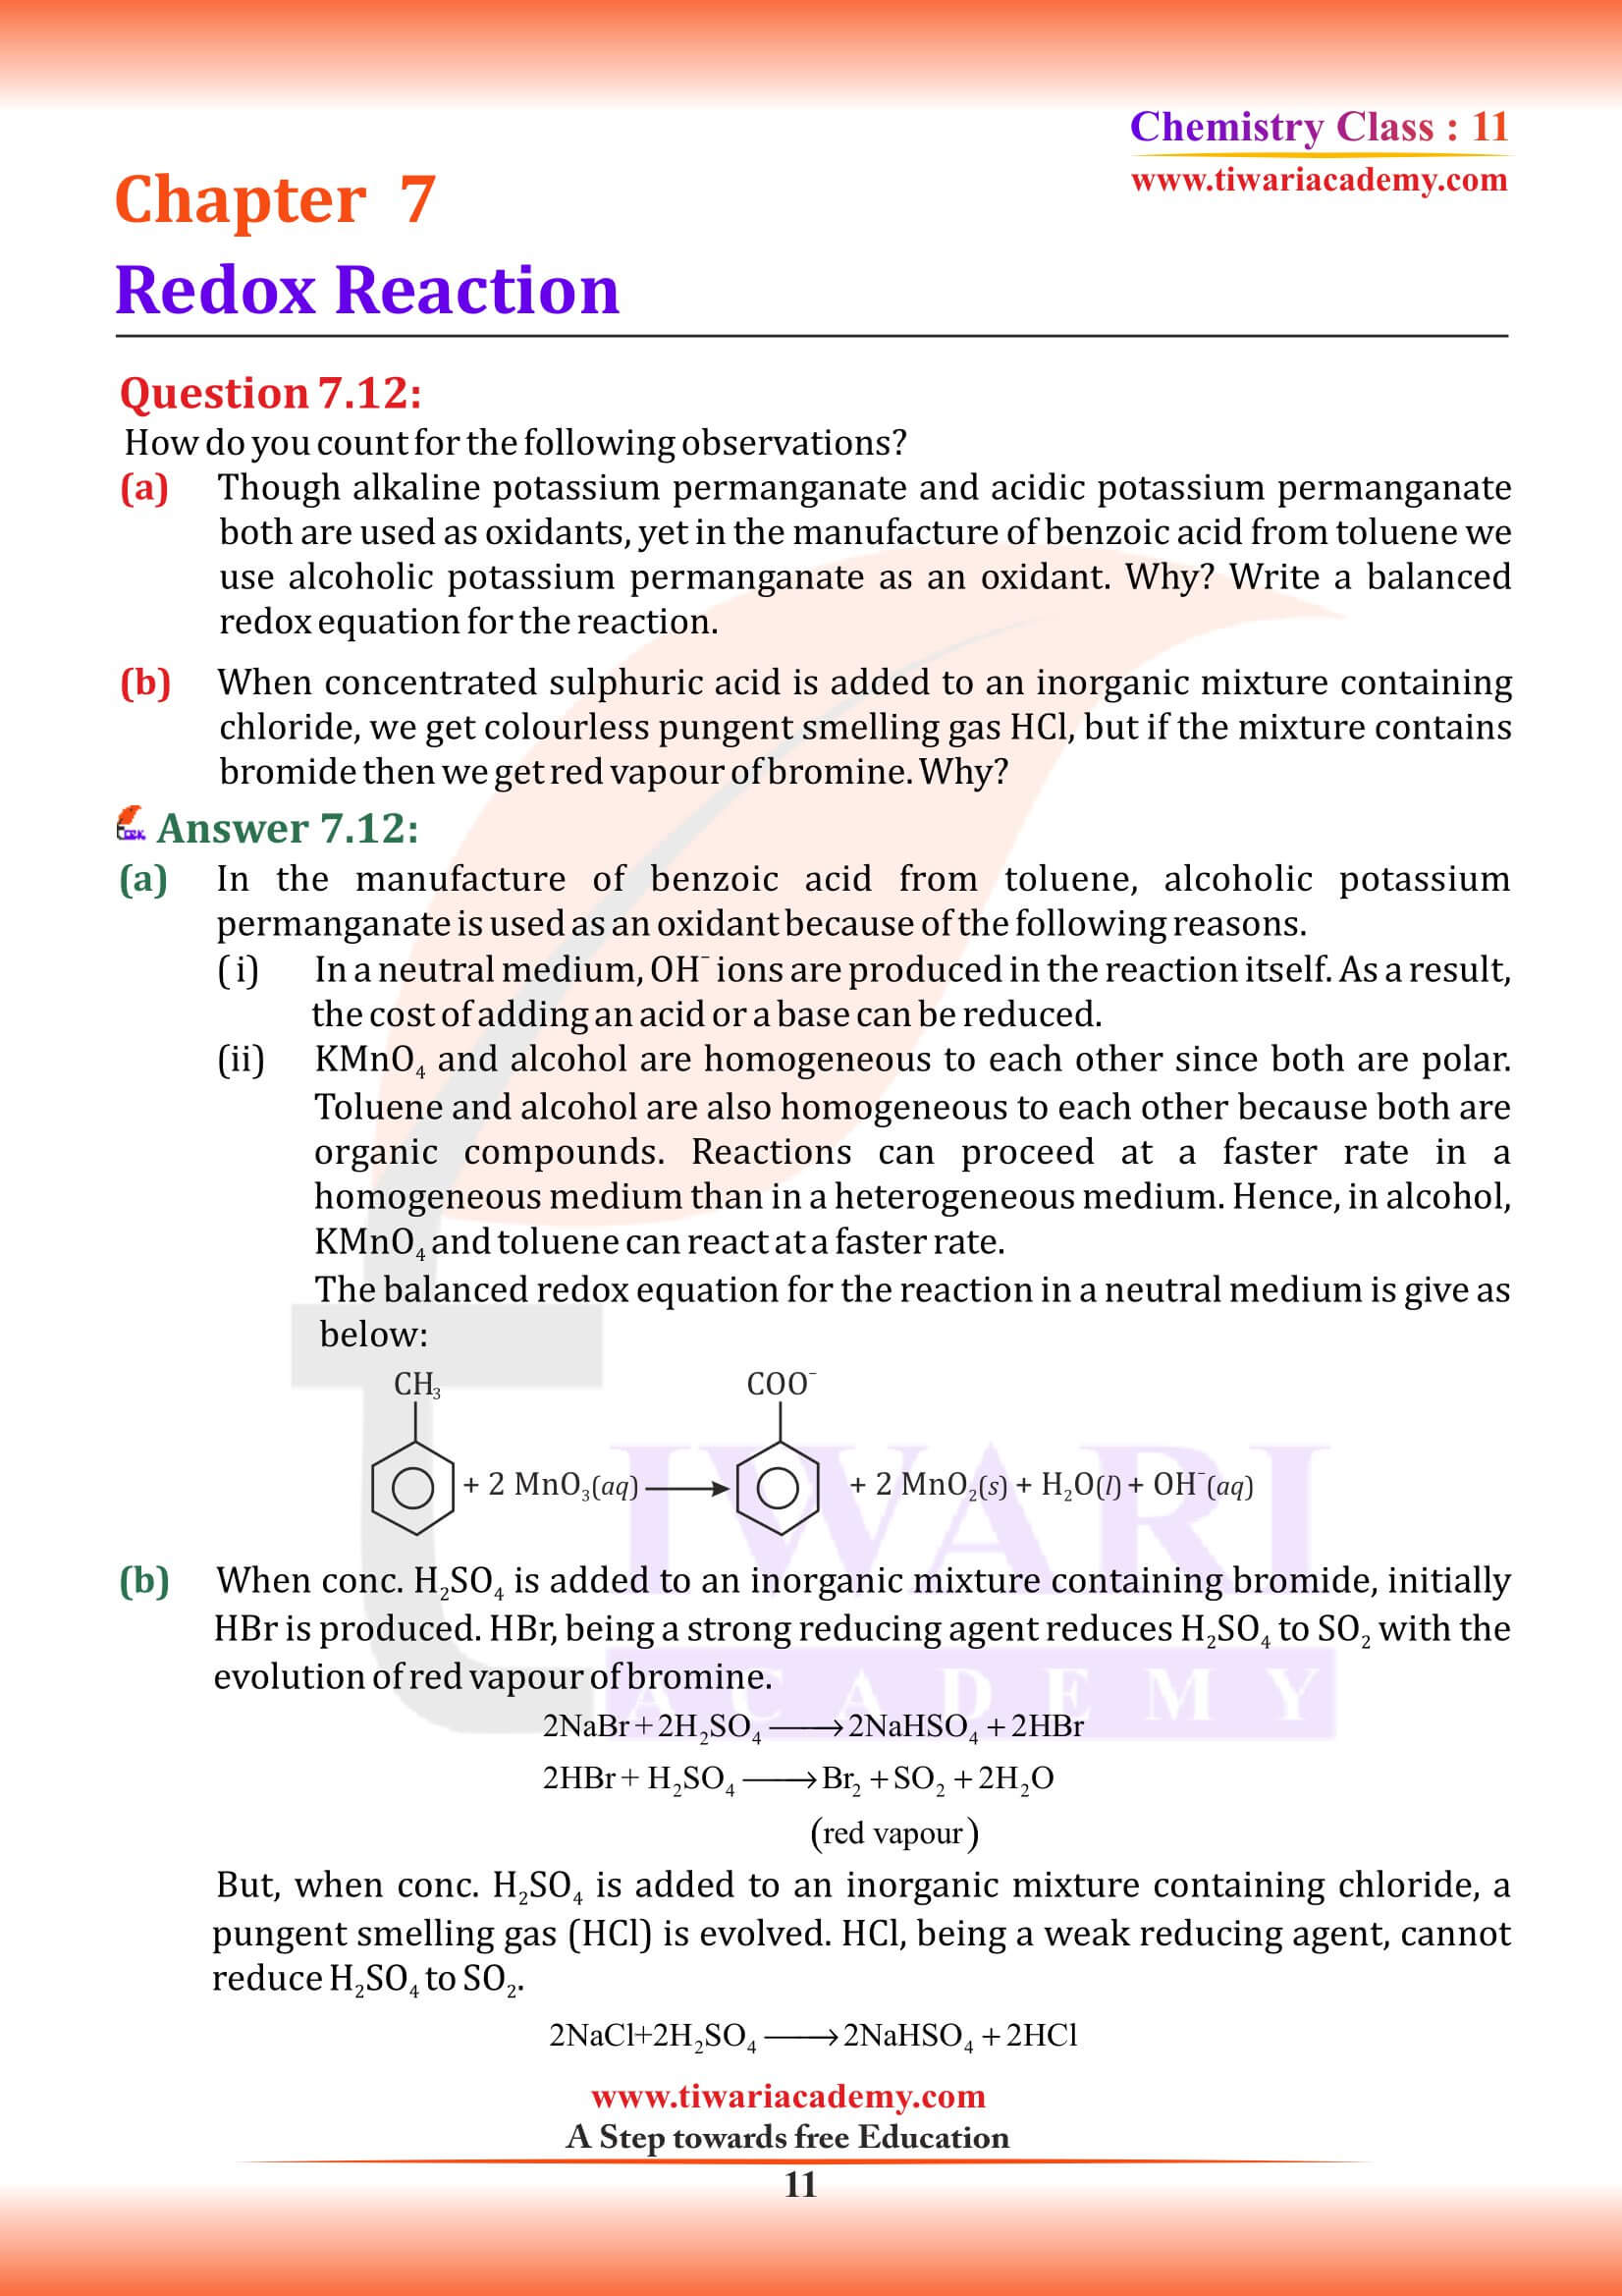 NCERT Class 11 Chemistry Chapter 7 Solutions